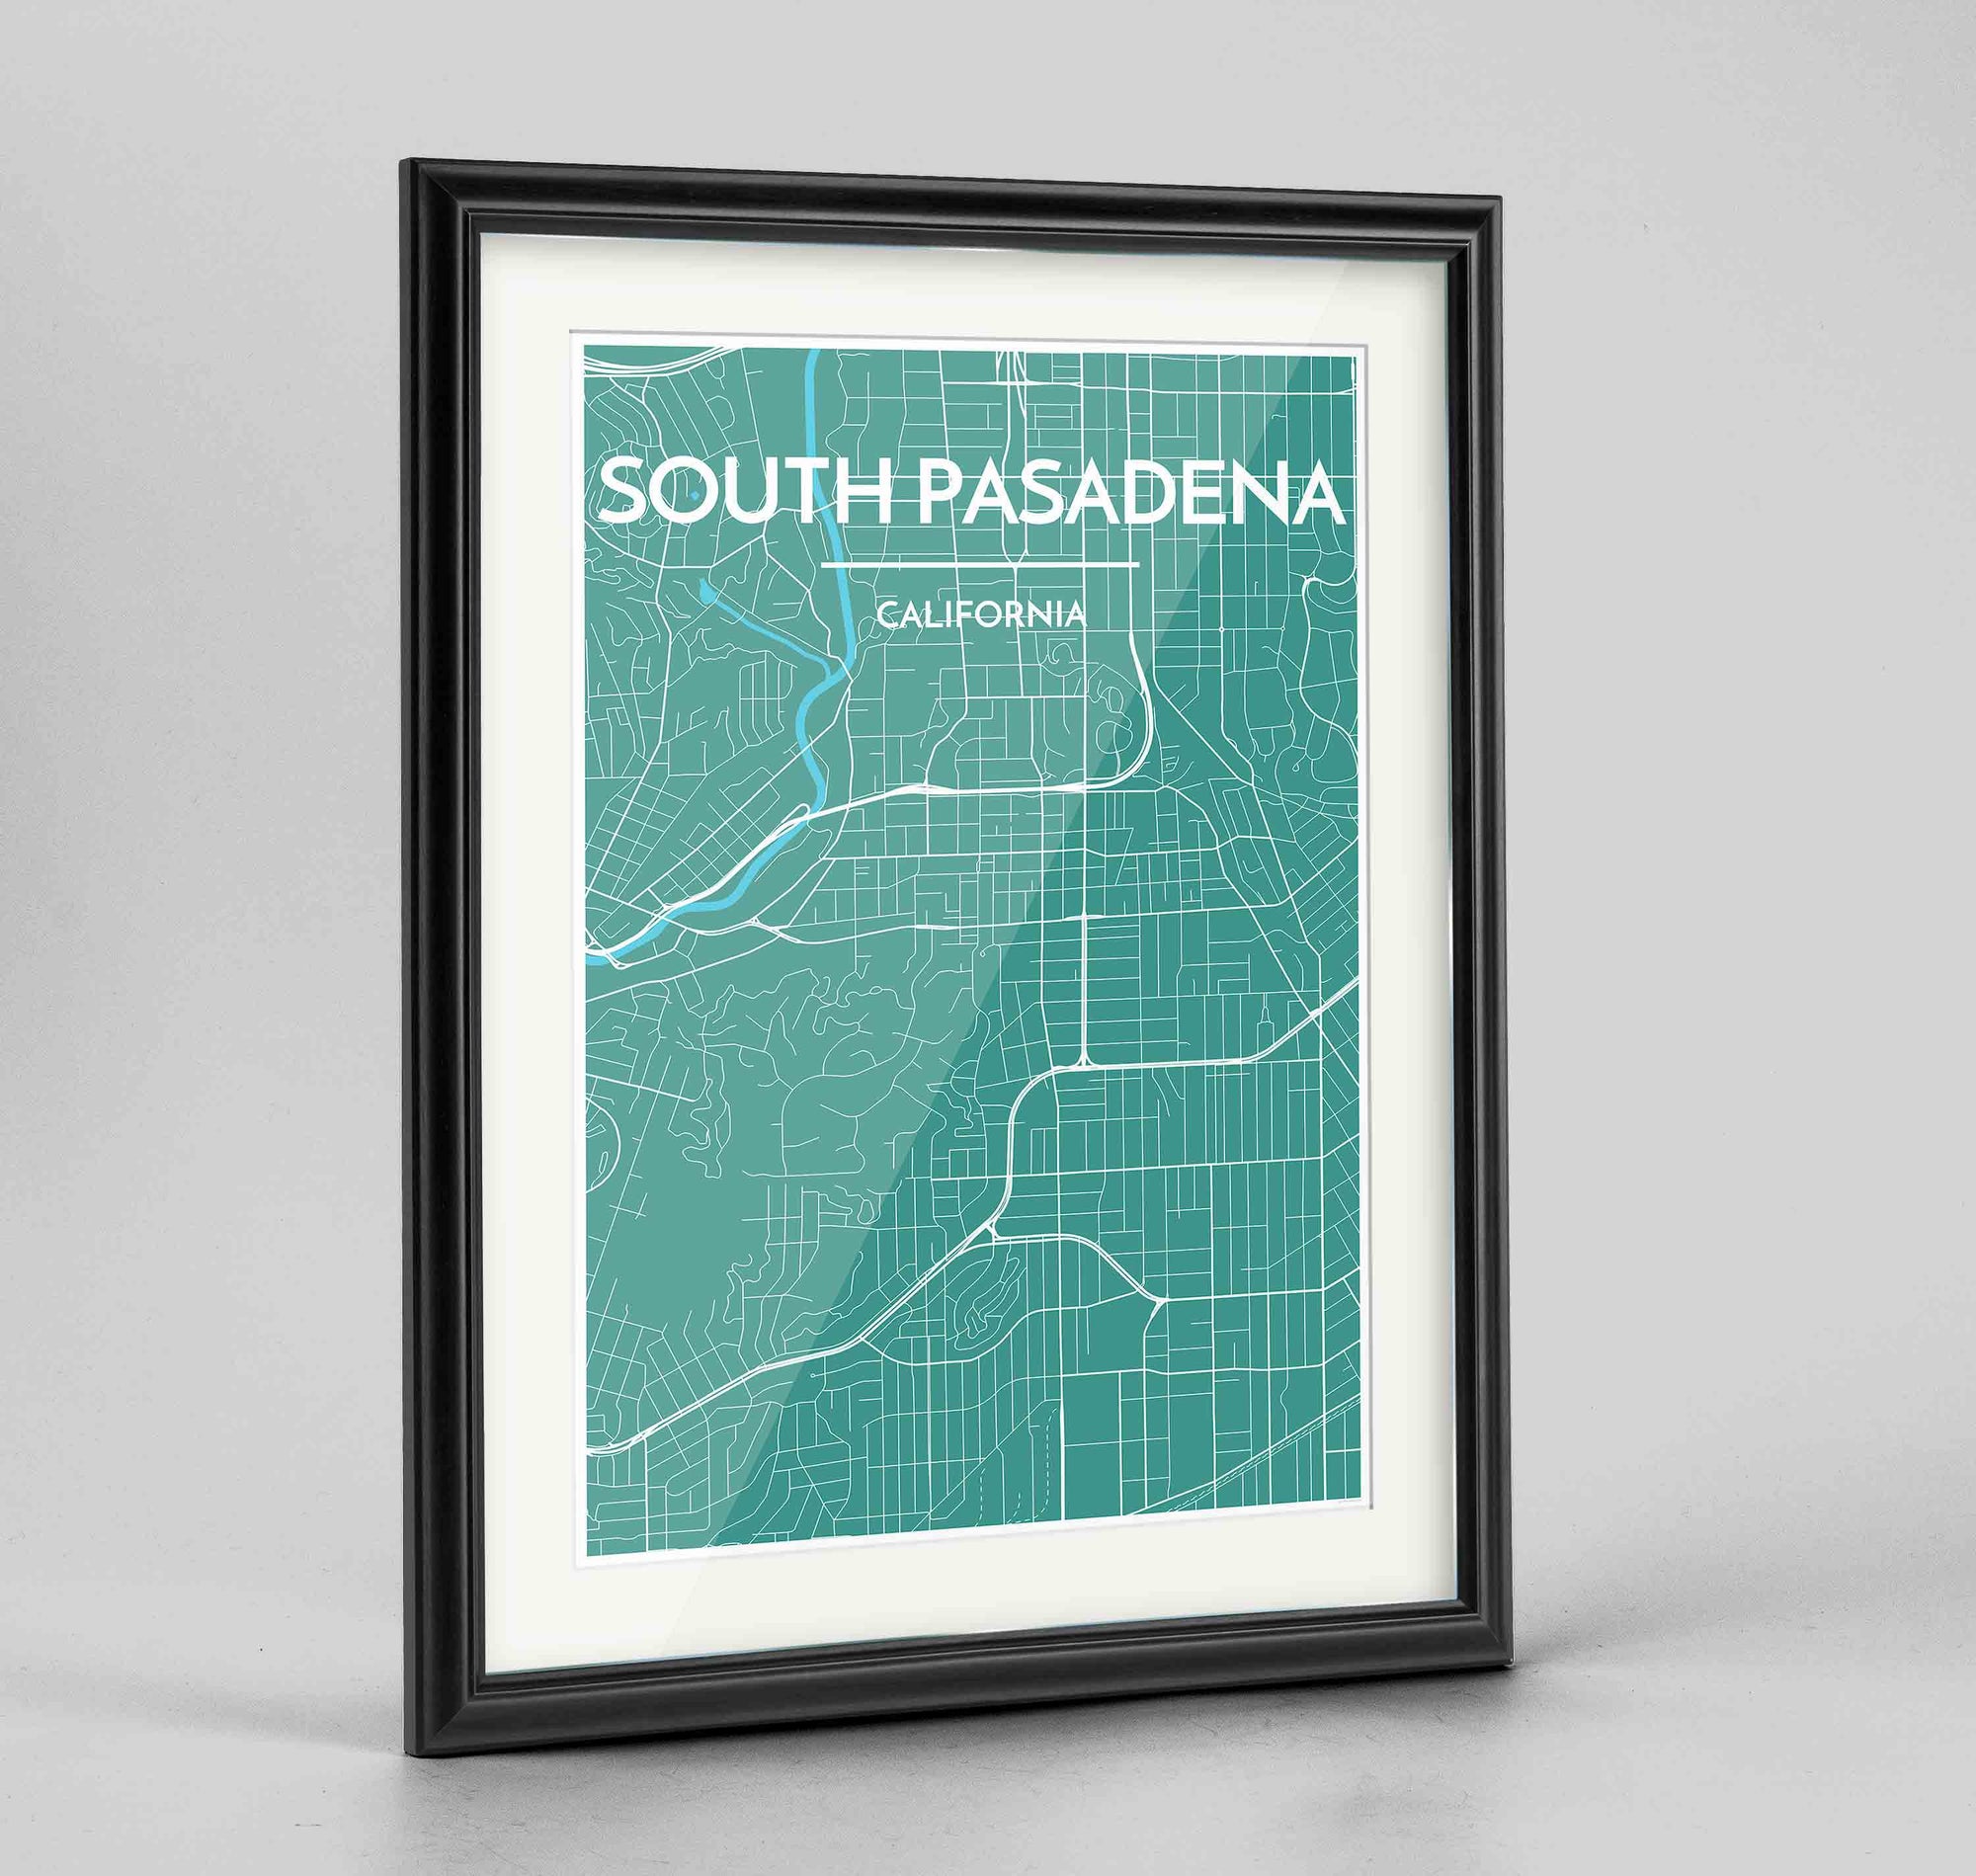 Framed South Pasadena Map Art Print 24x36" Traditional Black frame Point Two Design Group